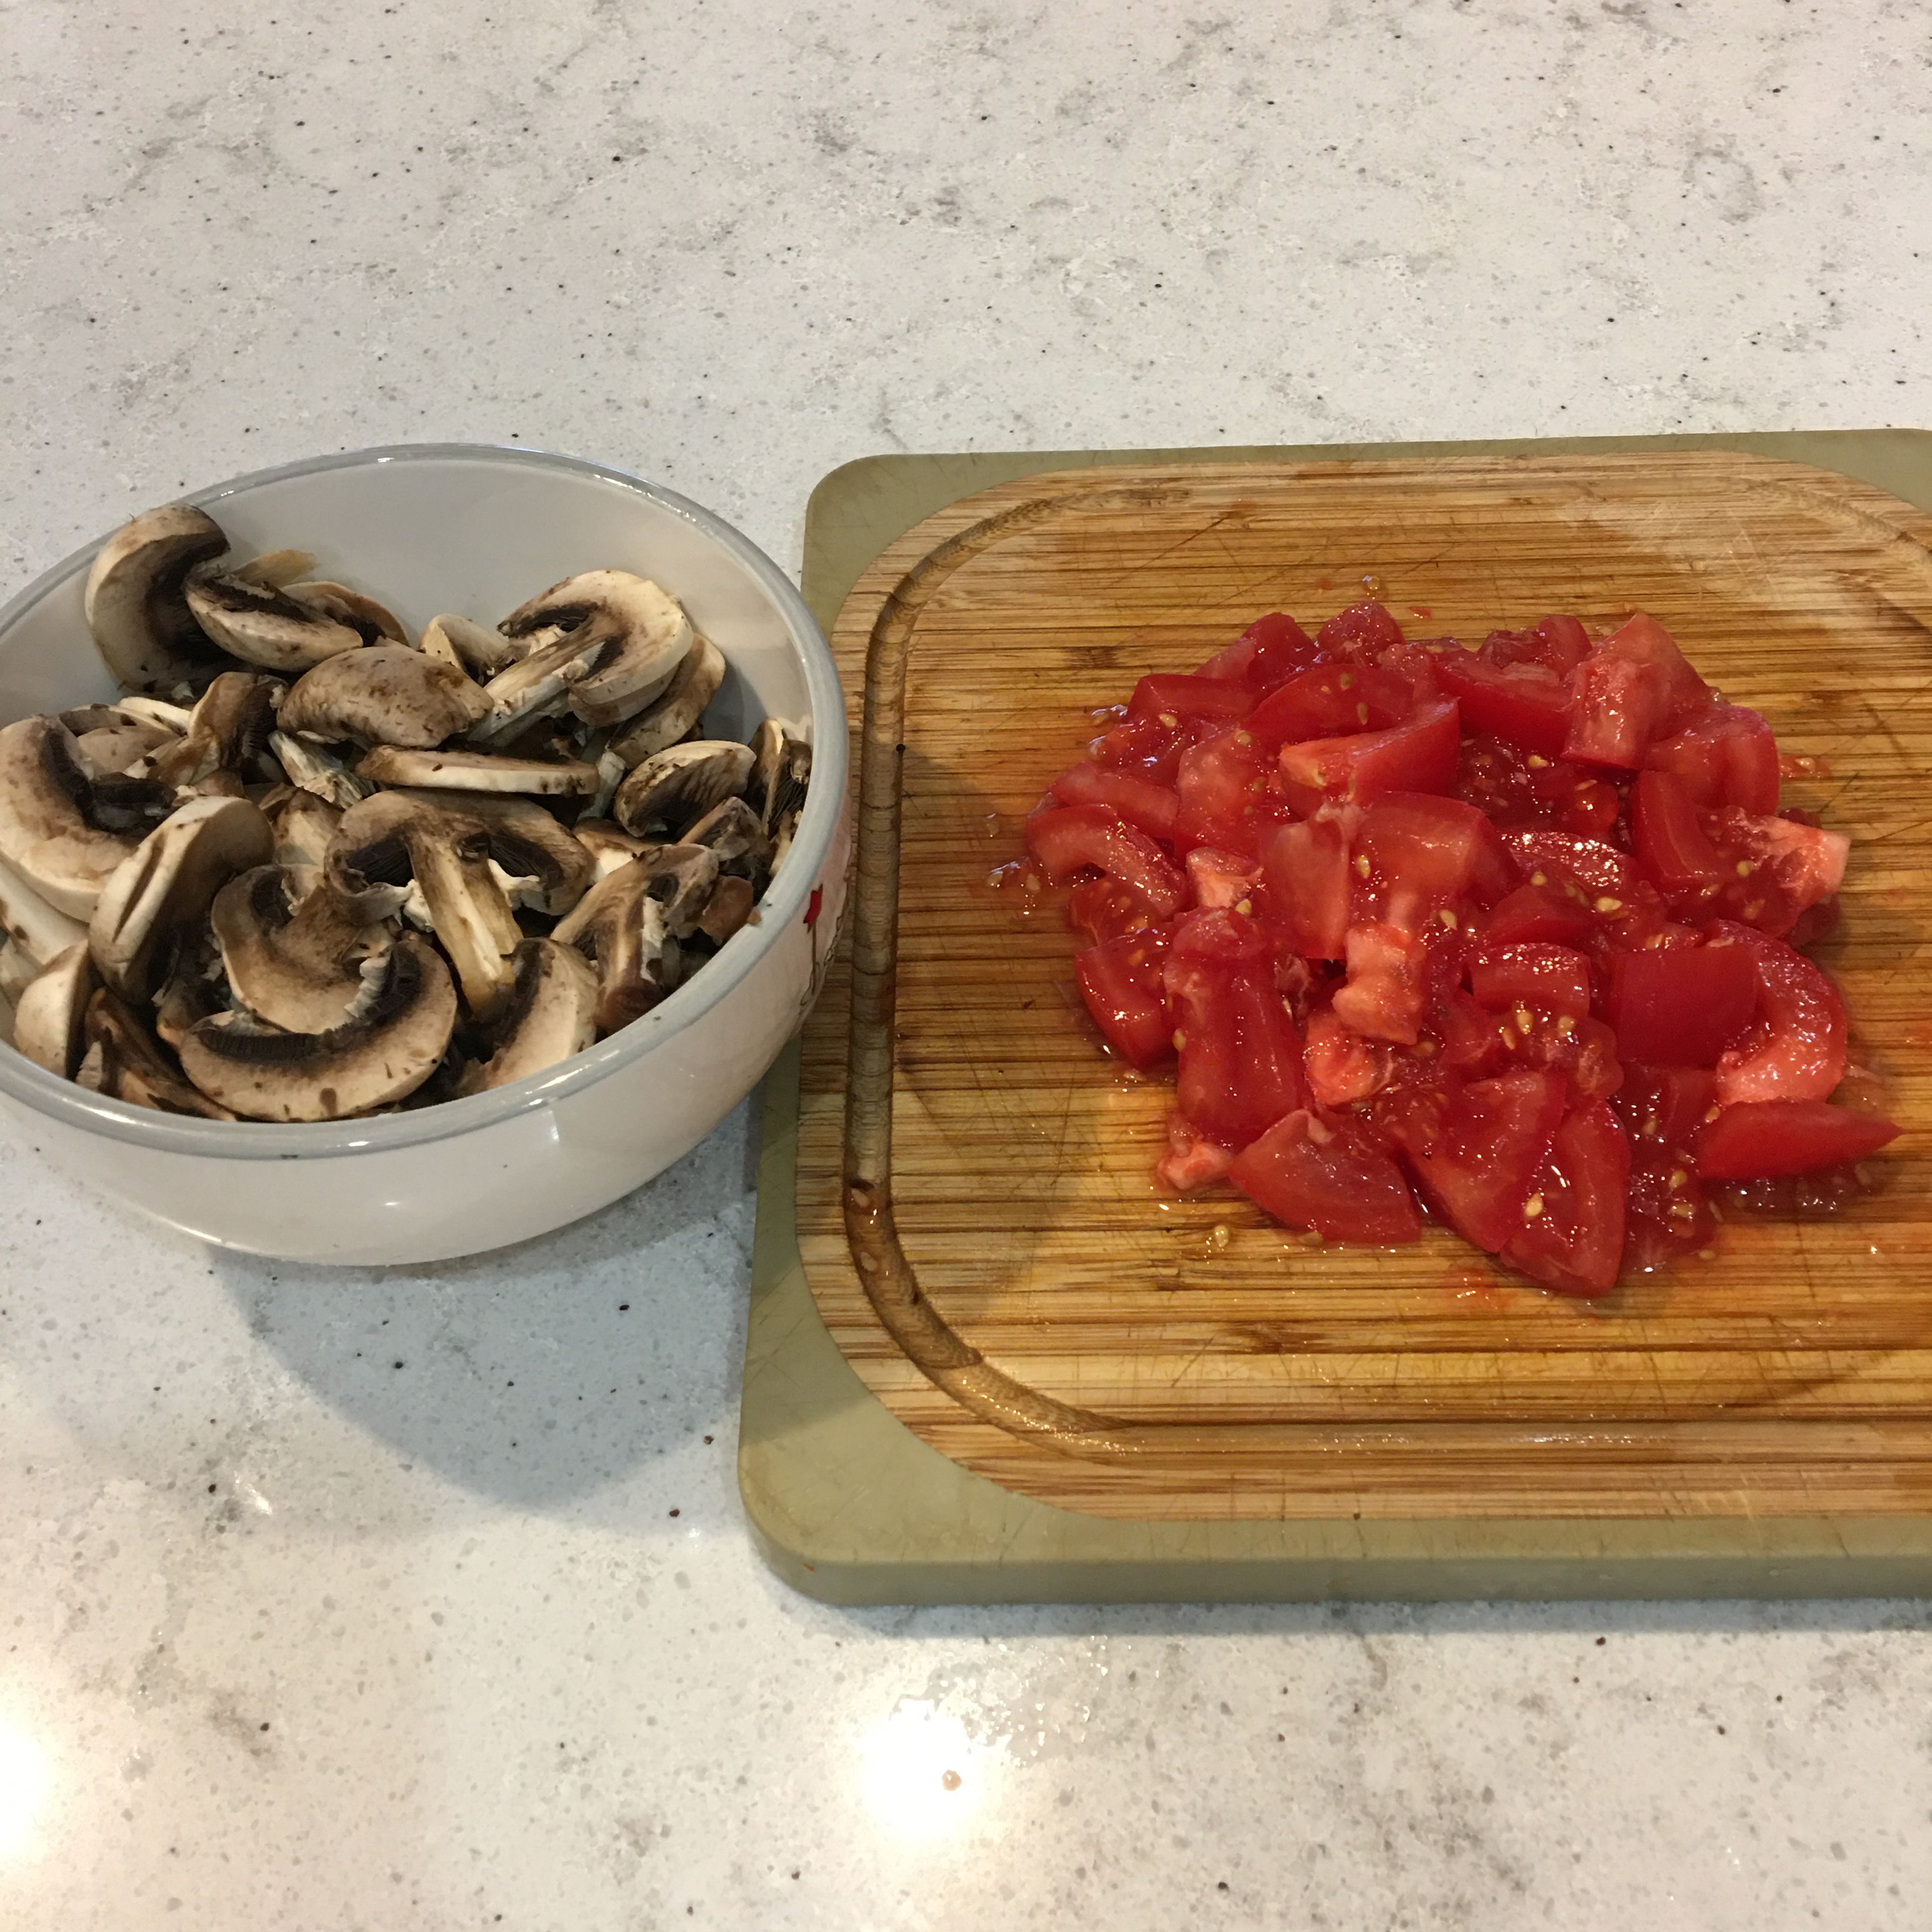 In the meantime wash and clean the tomatoes and mushrooms, then chop them.